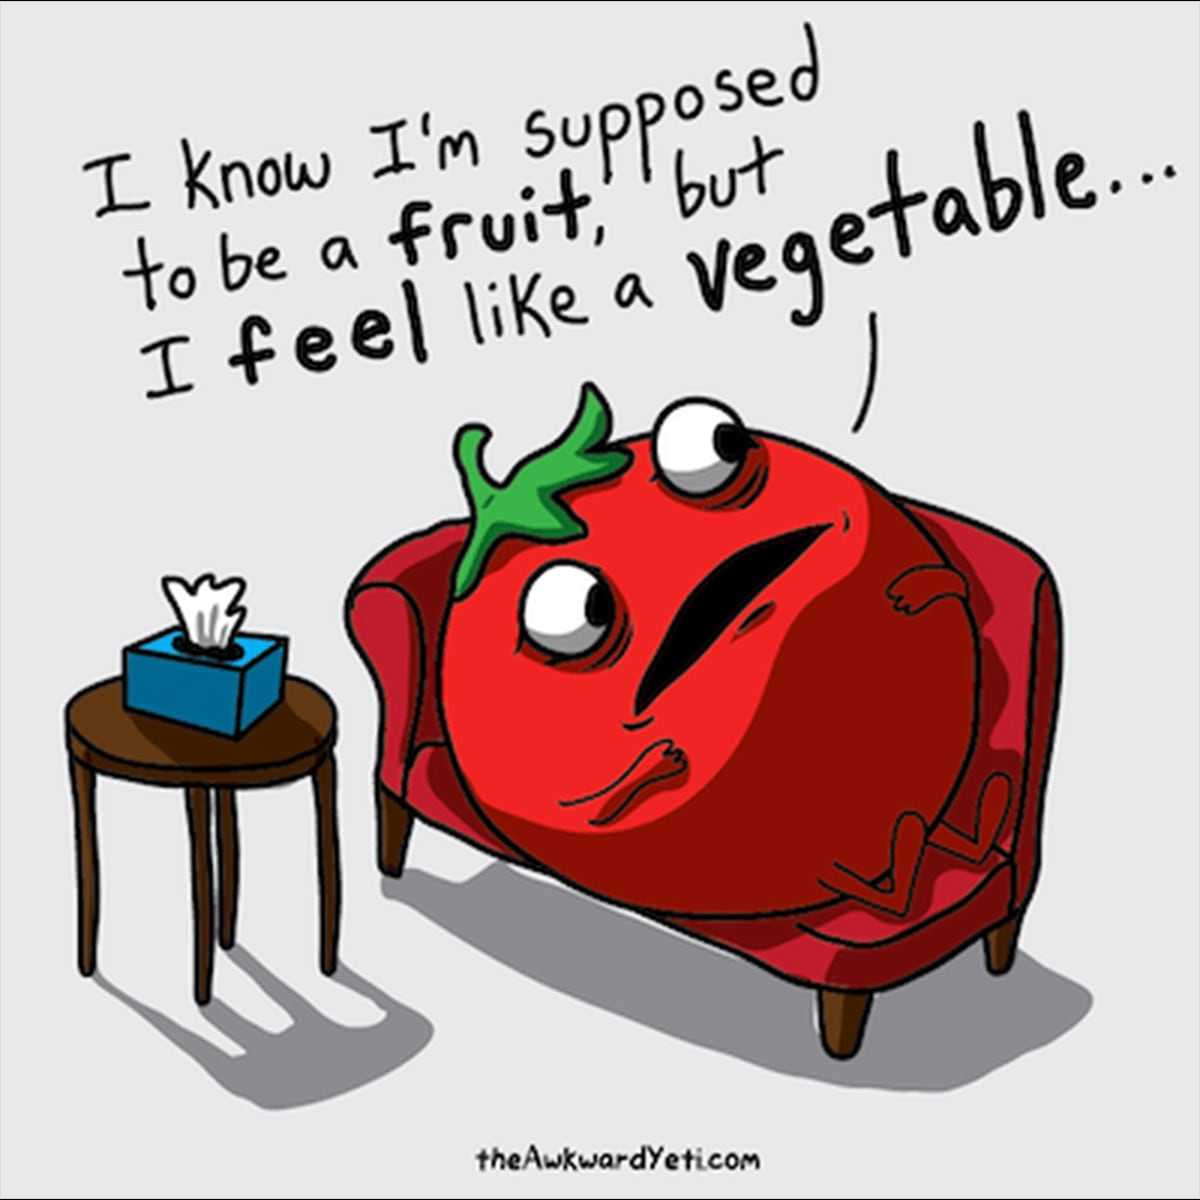 I know I'm supposed to be a fruit, but I feel like a vegetable.